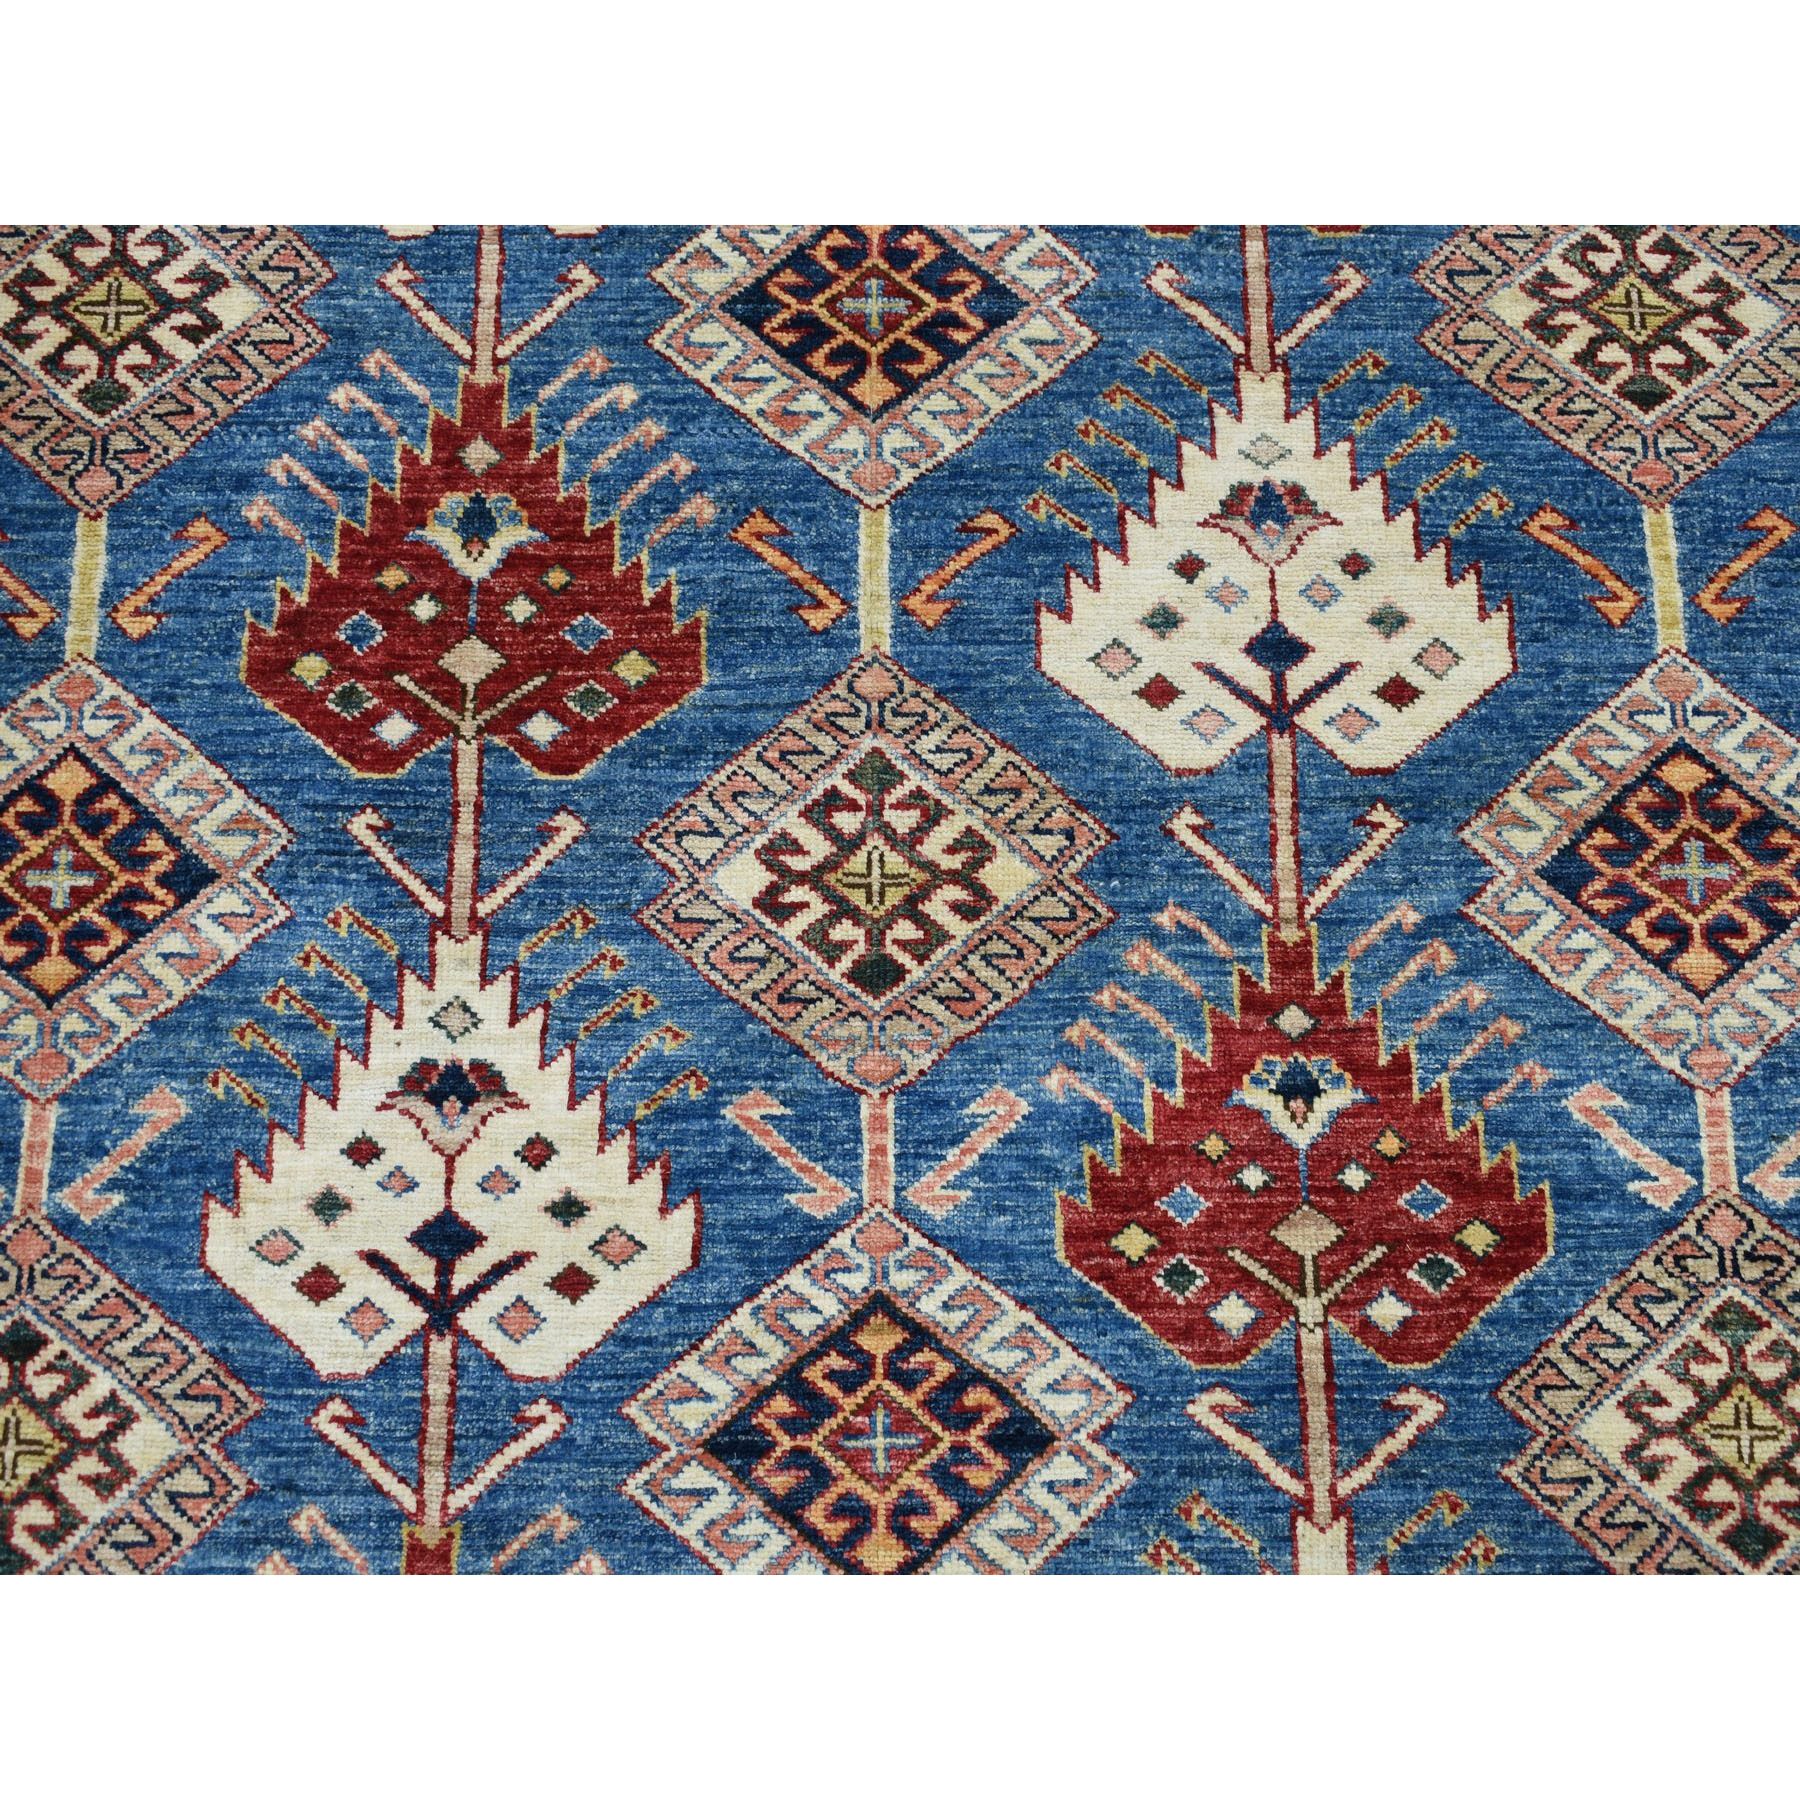 8-4 x11-2  Blue Super Kazak All Over Design Pure Wool Hand-Knotted Oriental Rug 